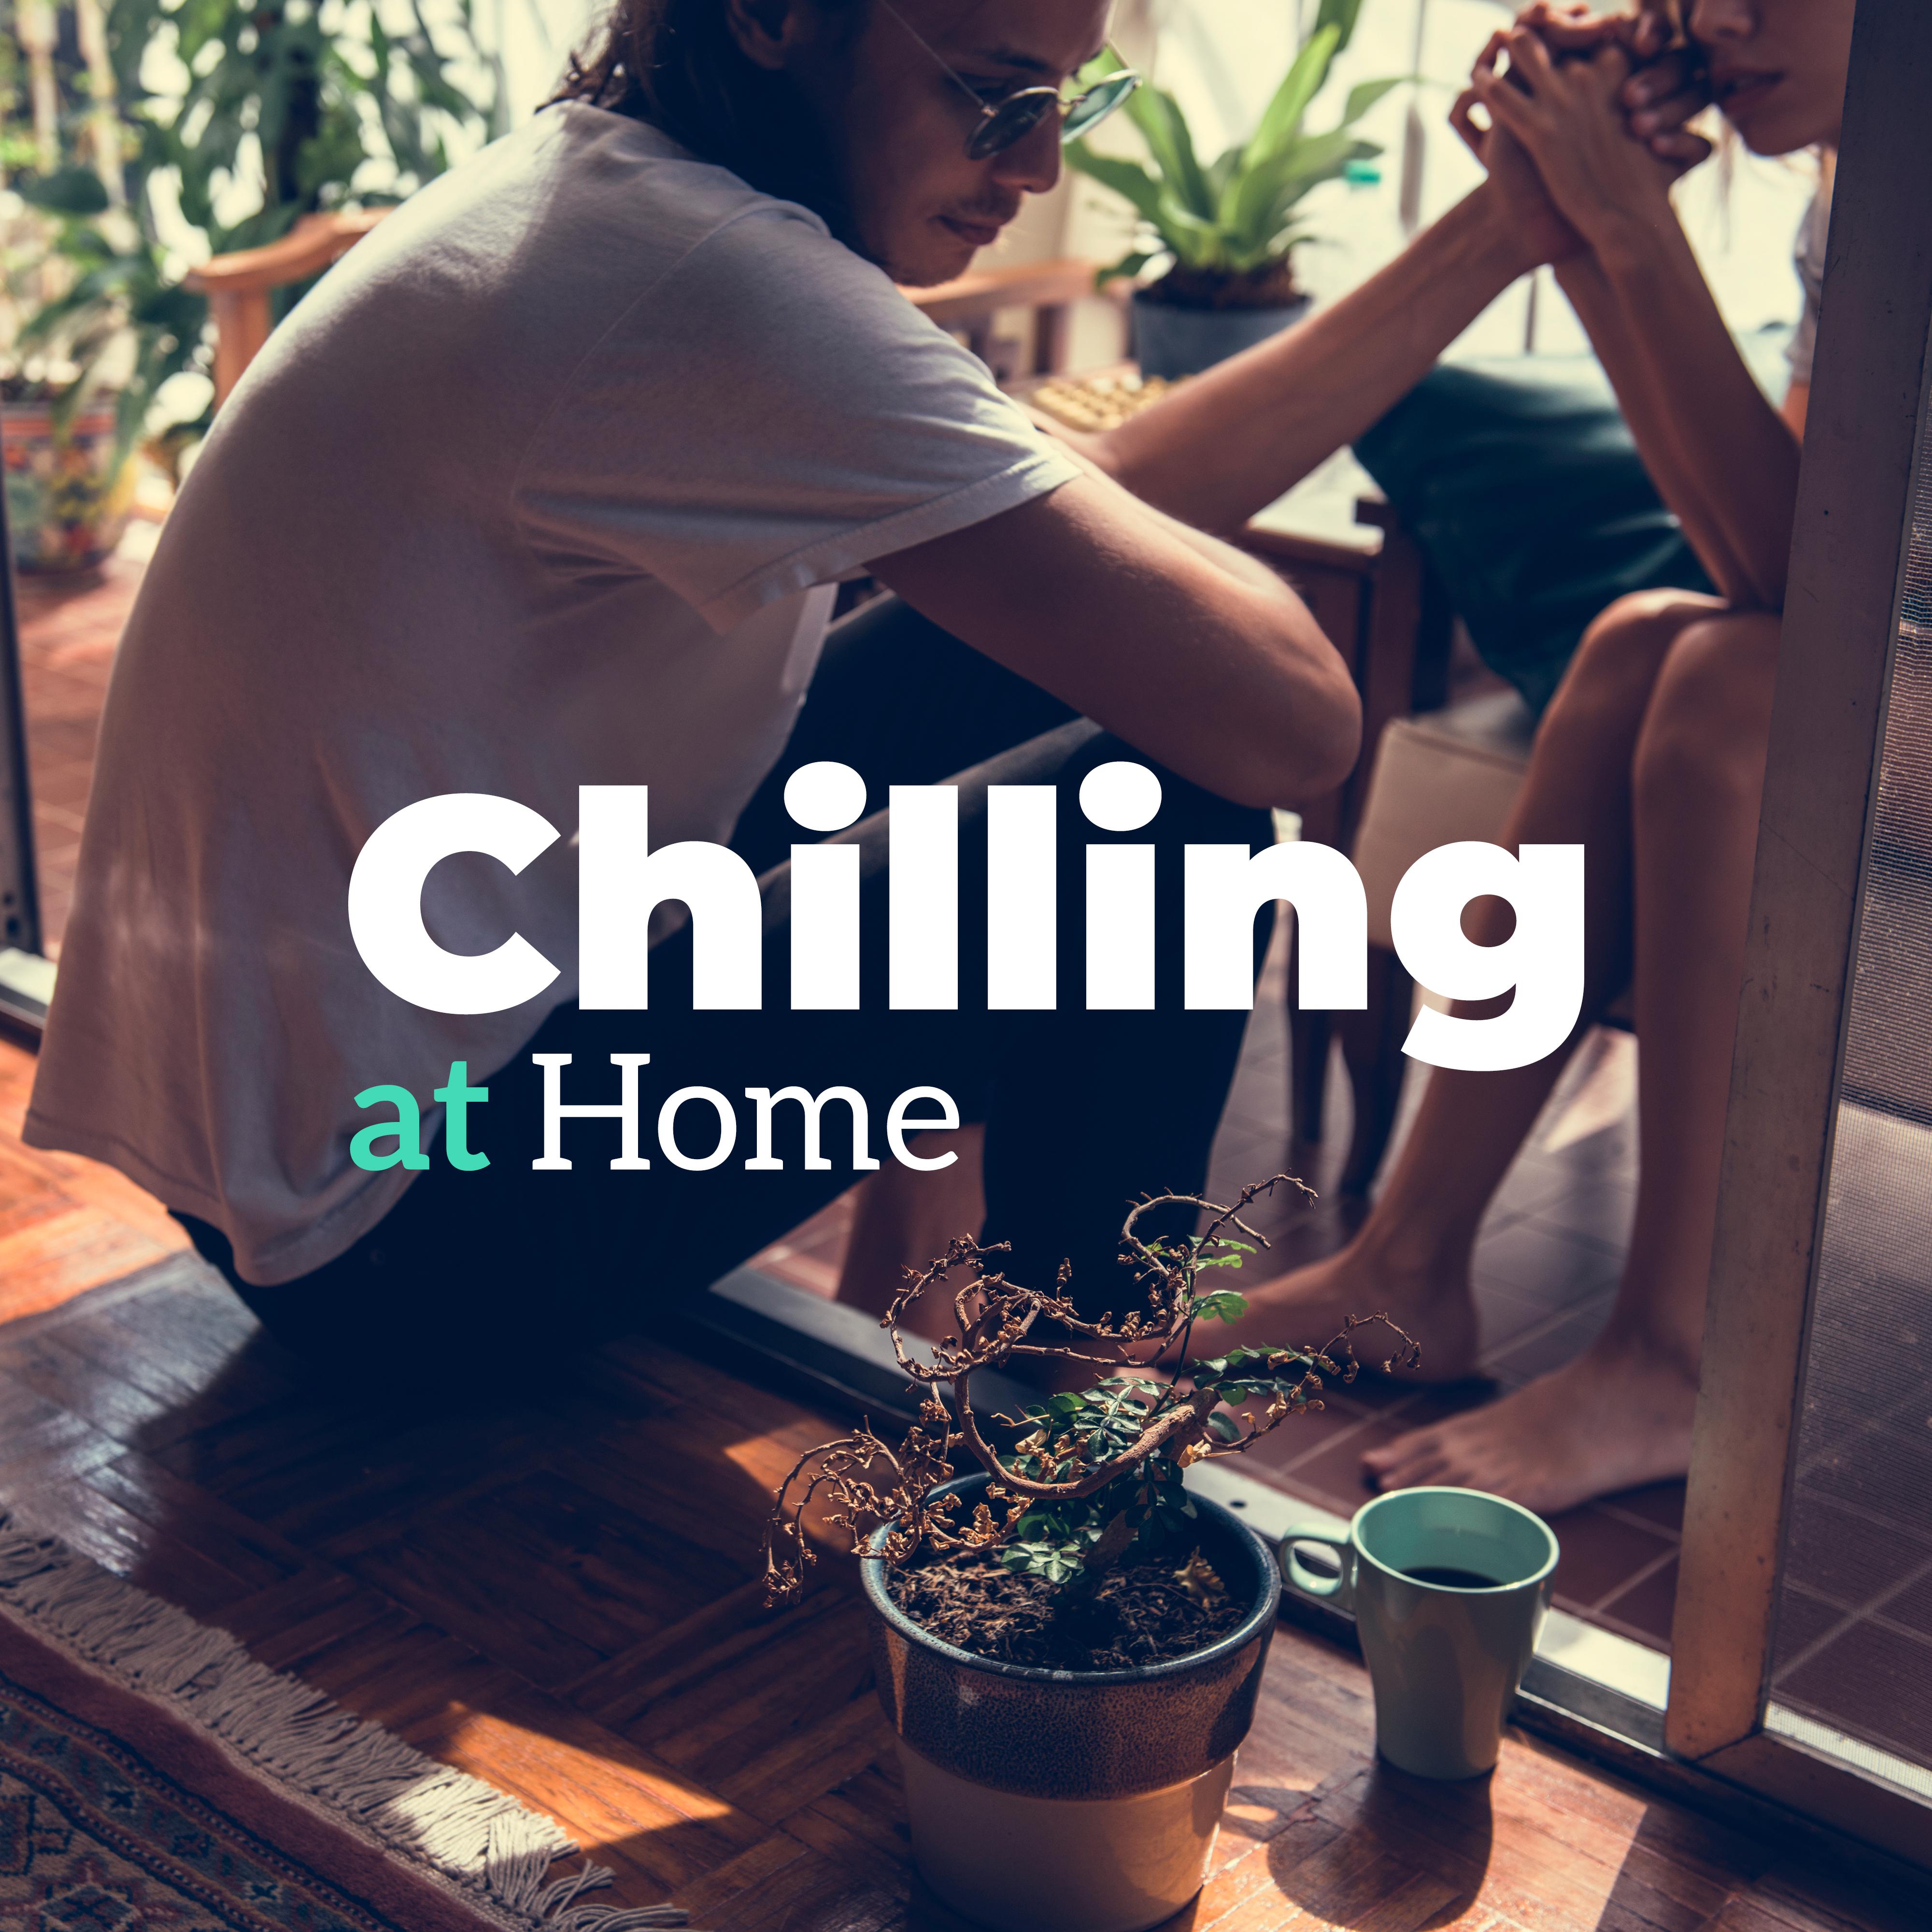 Chilling at Home - Relaxing Vibes After Work Hours and Other Duties, Music to Rest on the Couch, Afternoon Nap or Simple Relaxation